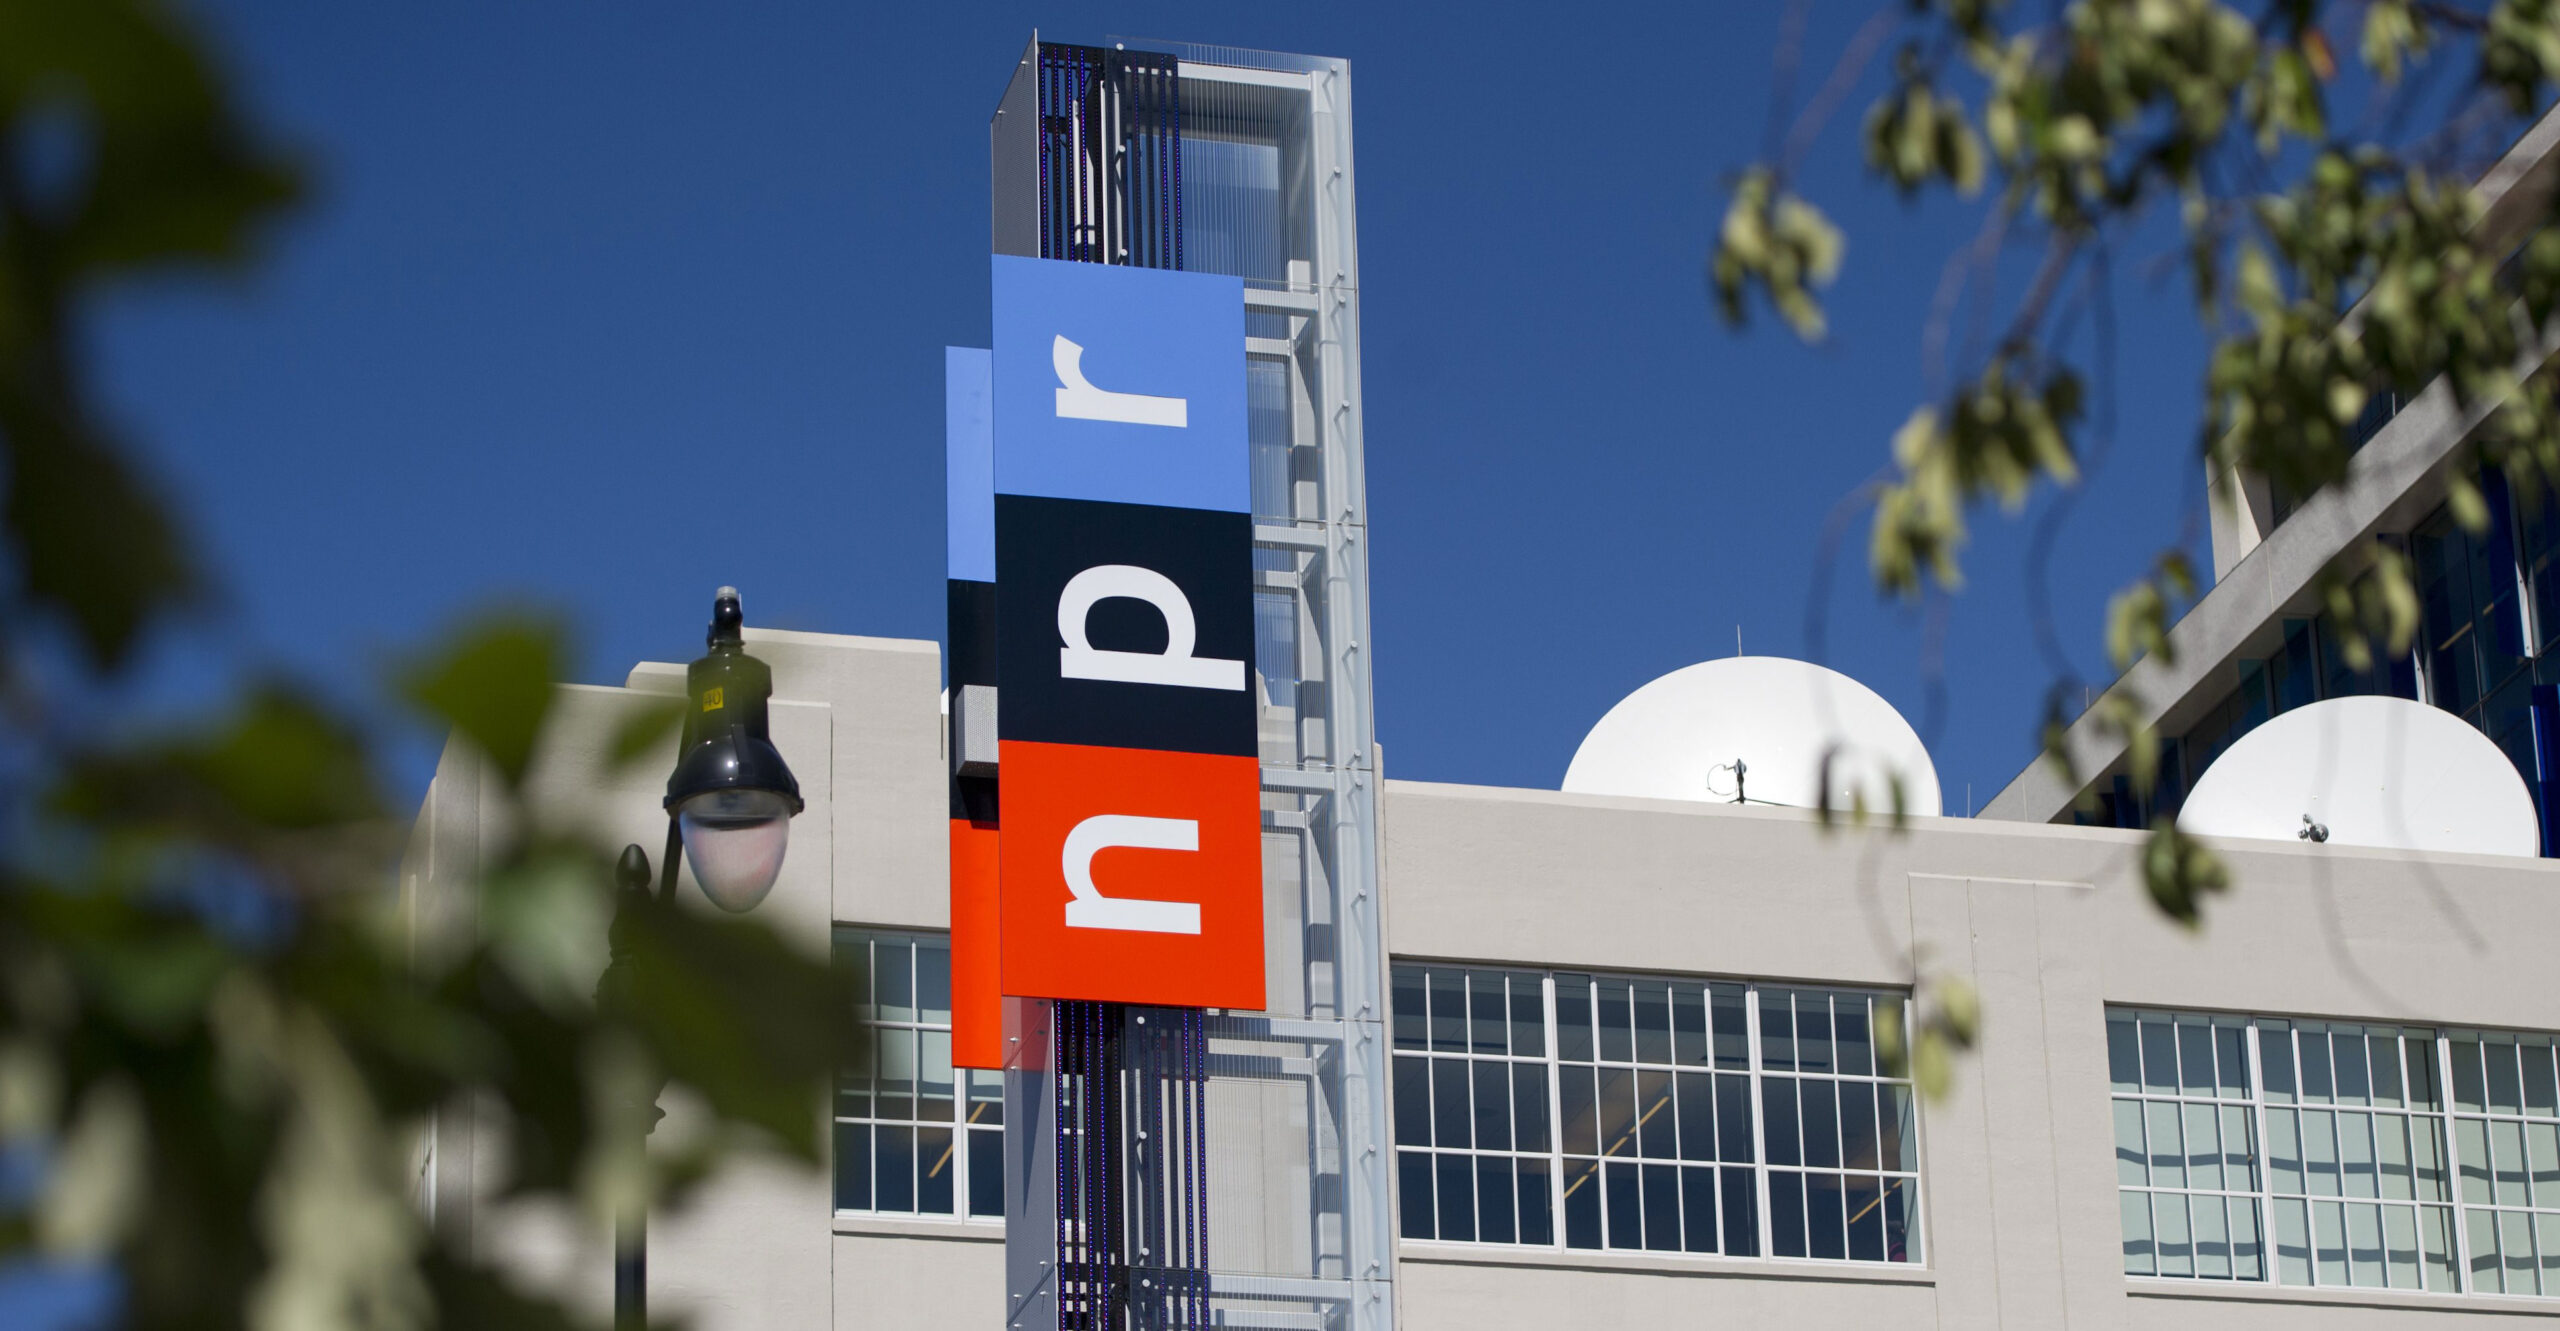 At NPR,  Republicans Are All ‘Hard’ or ‘Far’ Right, but No Democrats Are ‘Hard’ or ‘Far’ Left